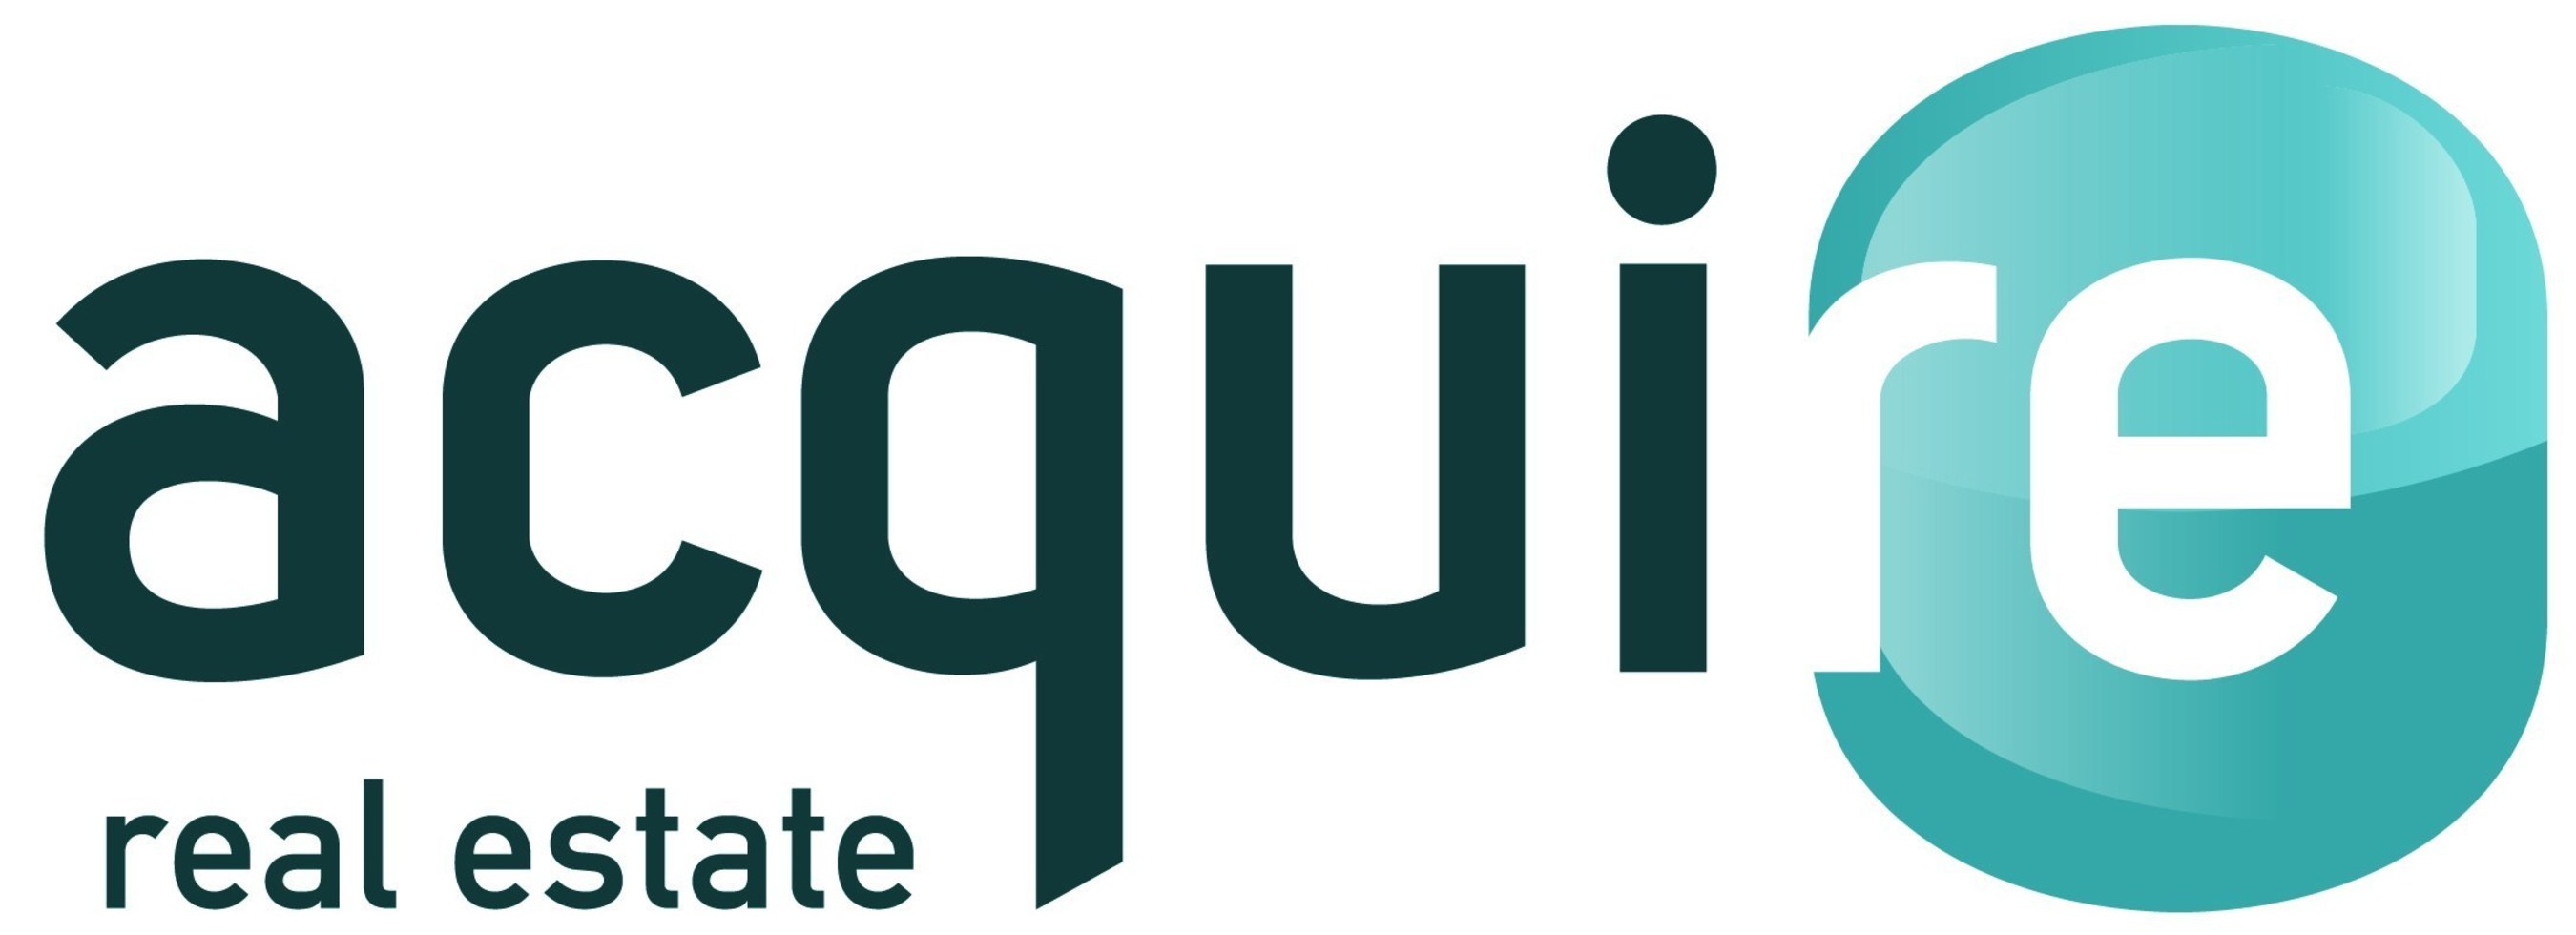 Acquire Real Estate (https://www.acquirerealestate.com/) provides public access to the real estate private placement business, bringing institutional-quality deals to the accredited investor.